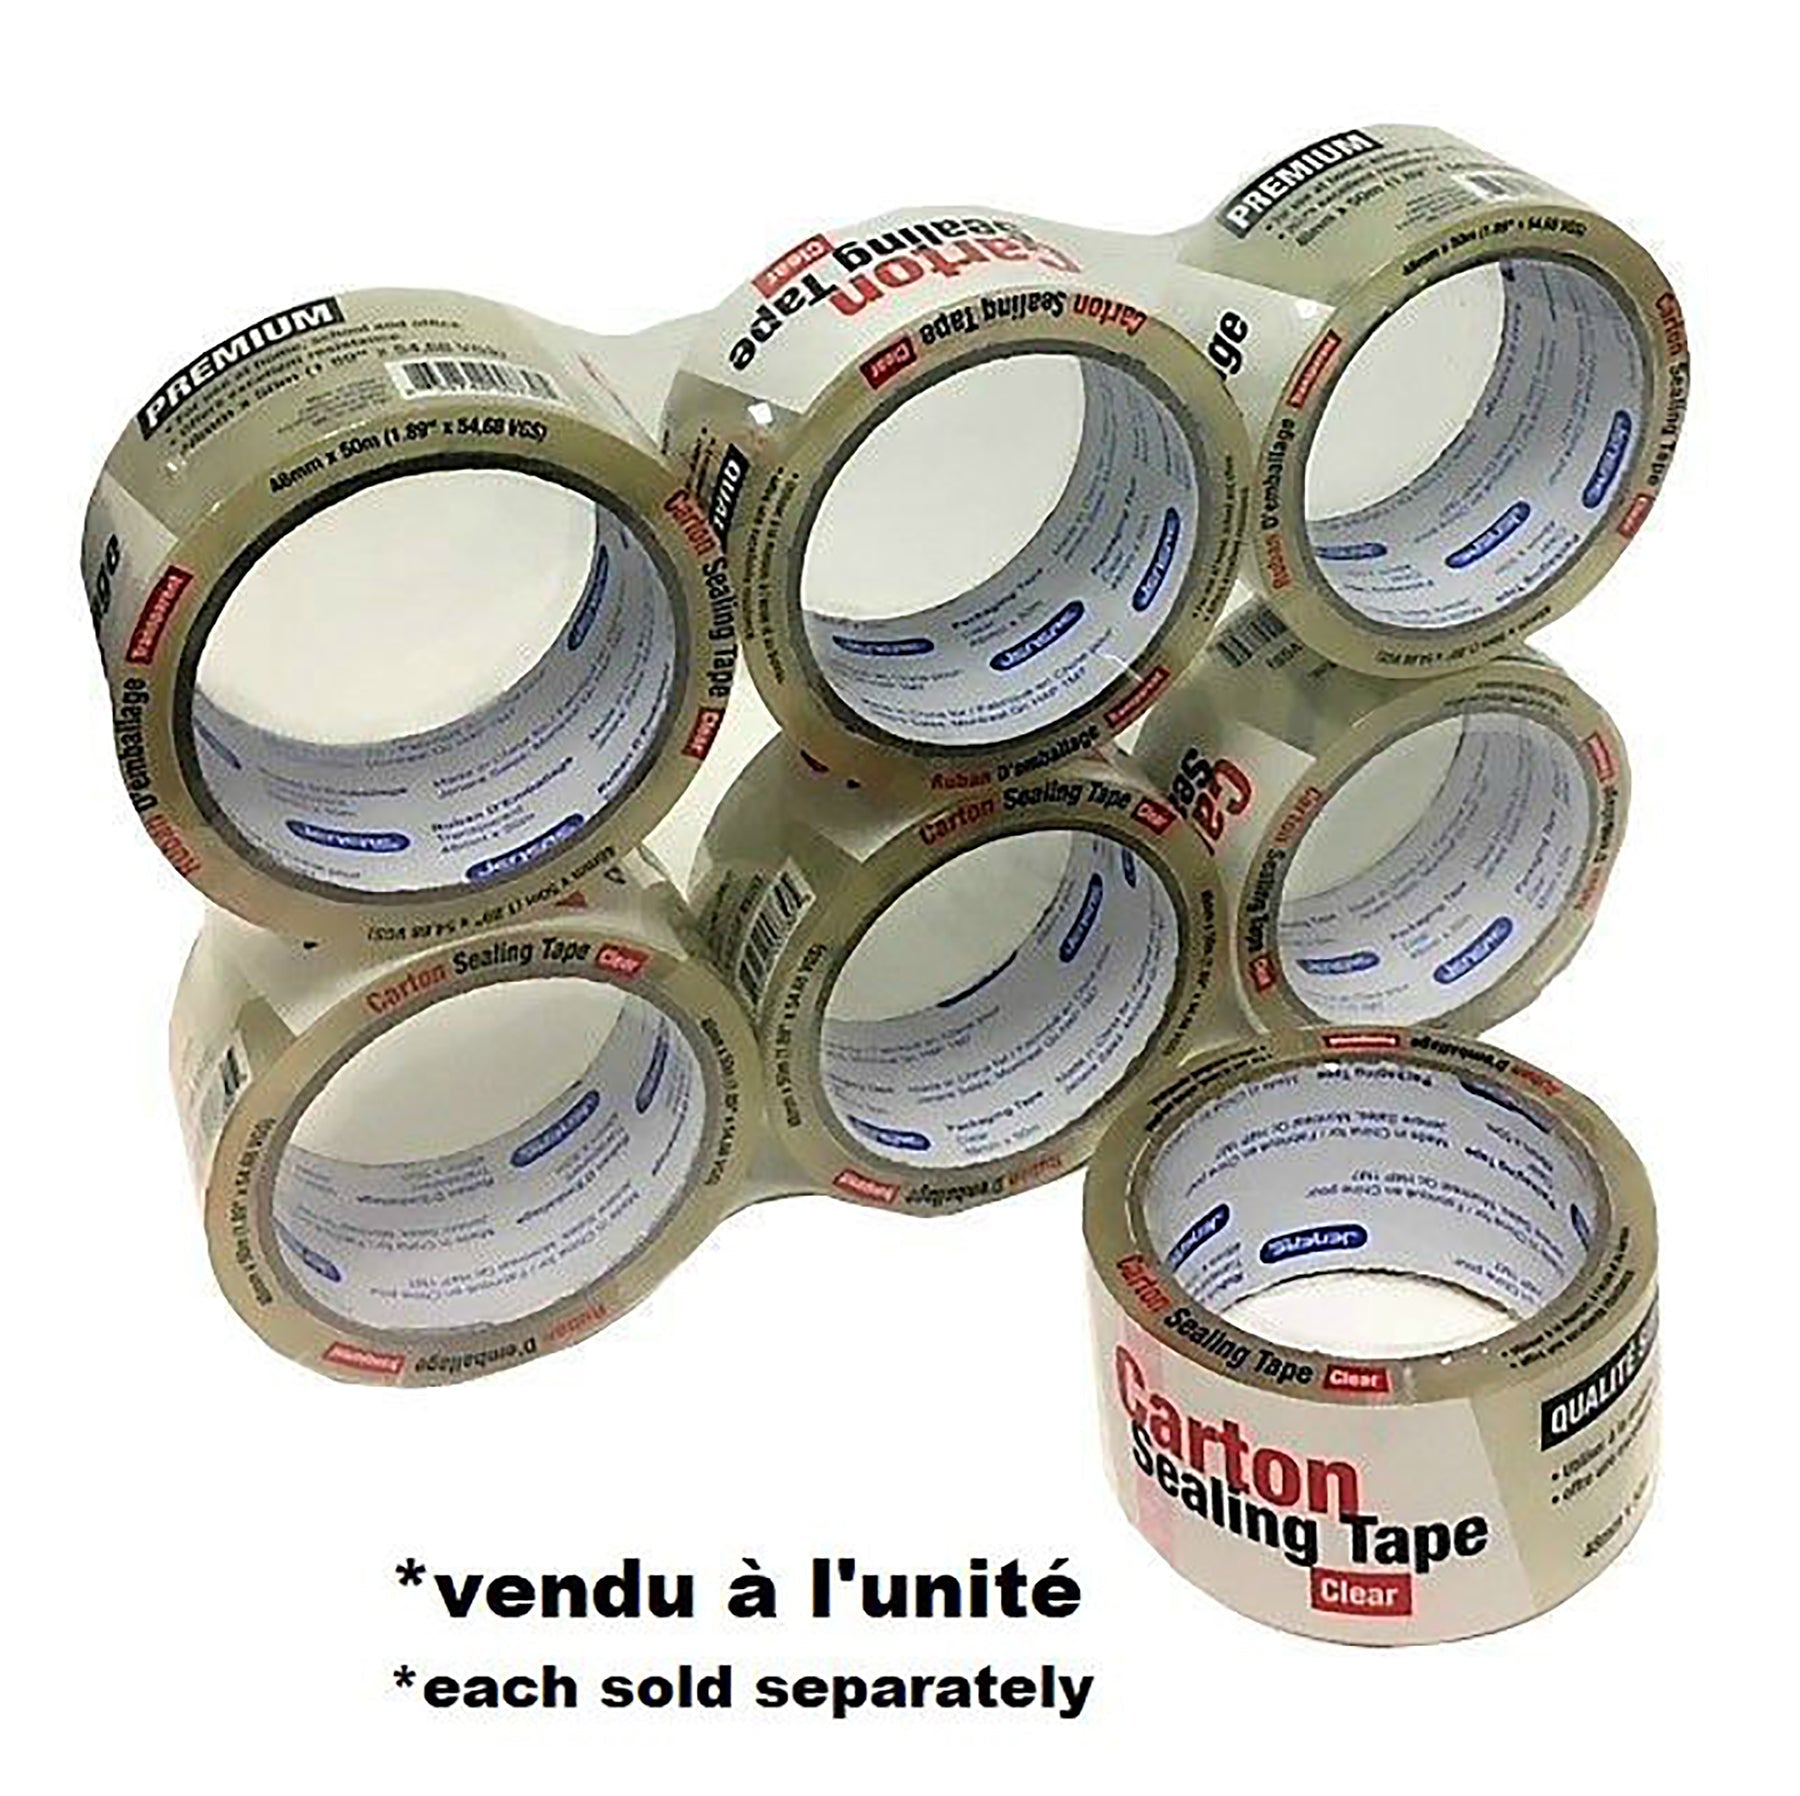 Clear Carton Sealing Tape 1.89in x54.68vgs